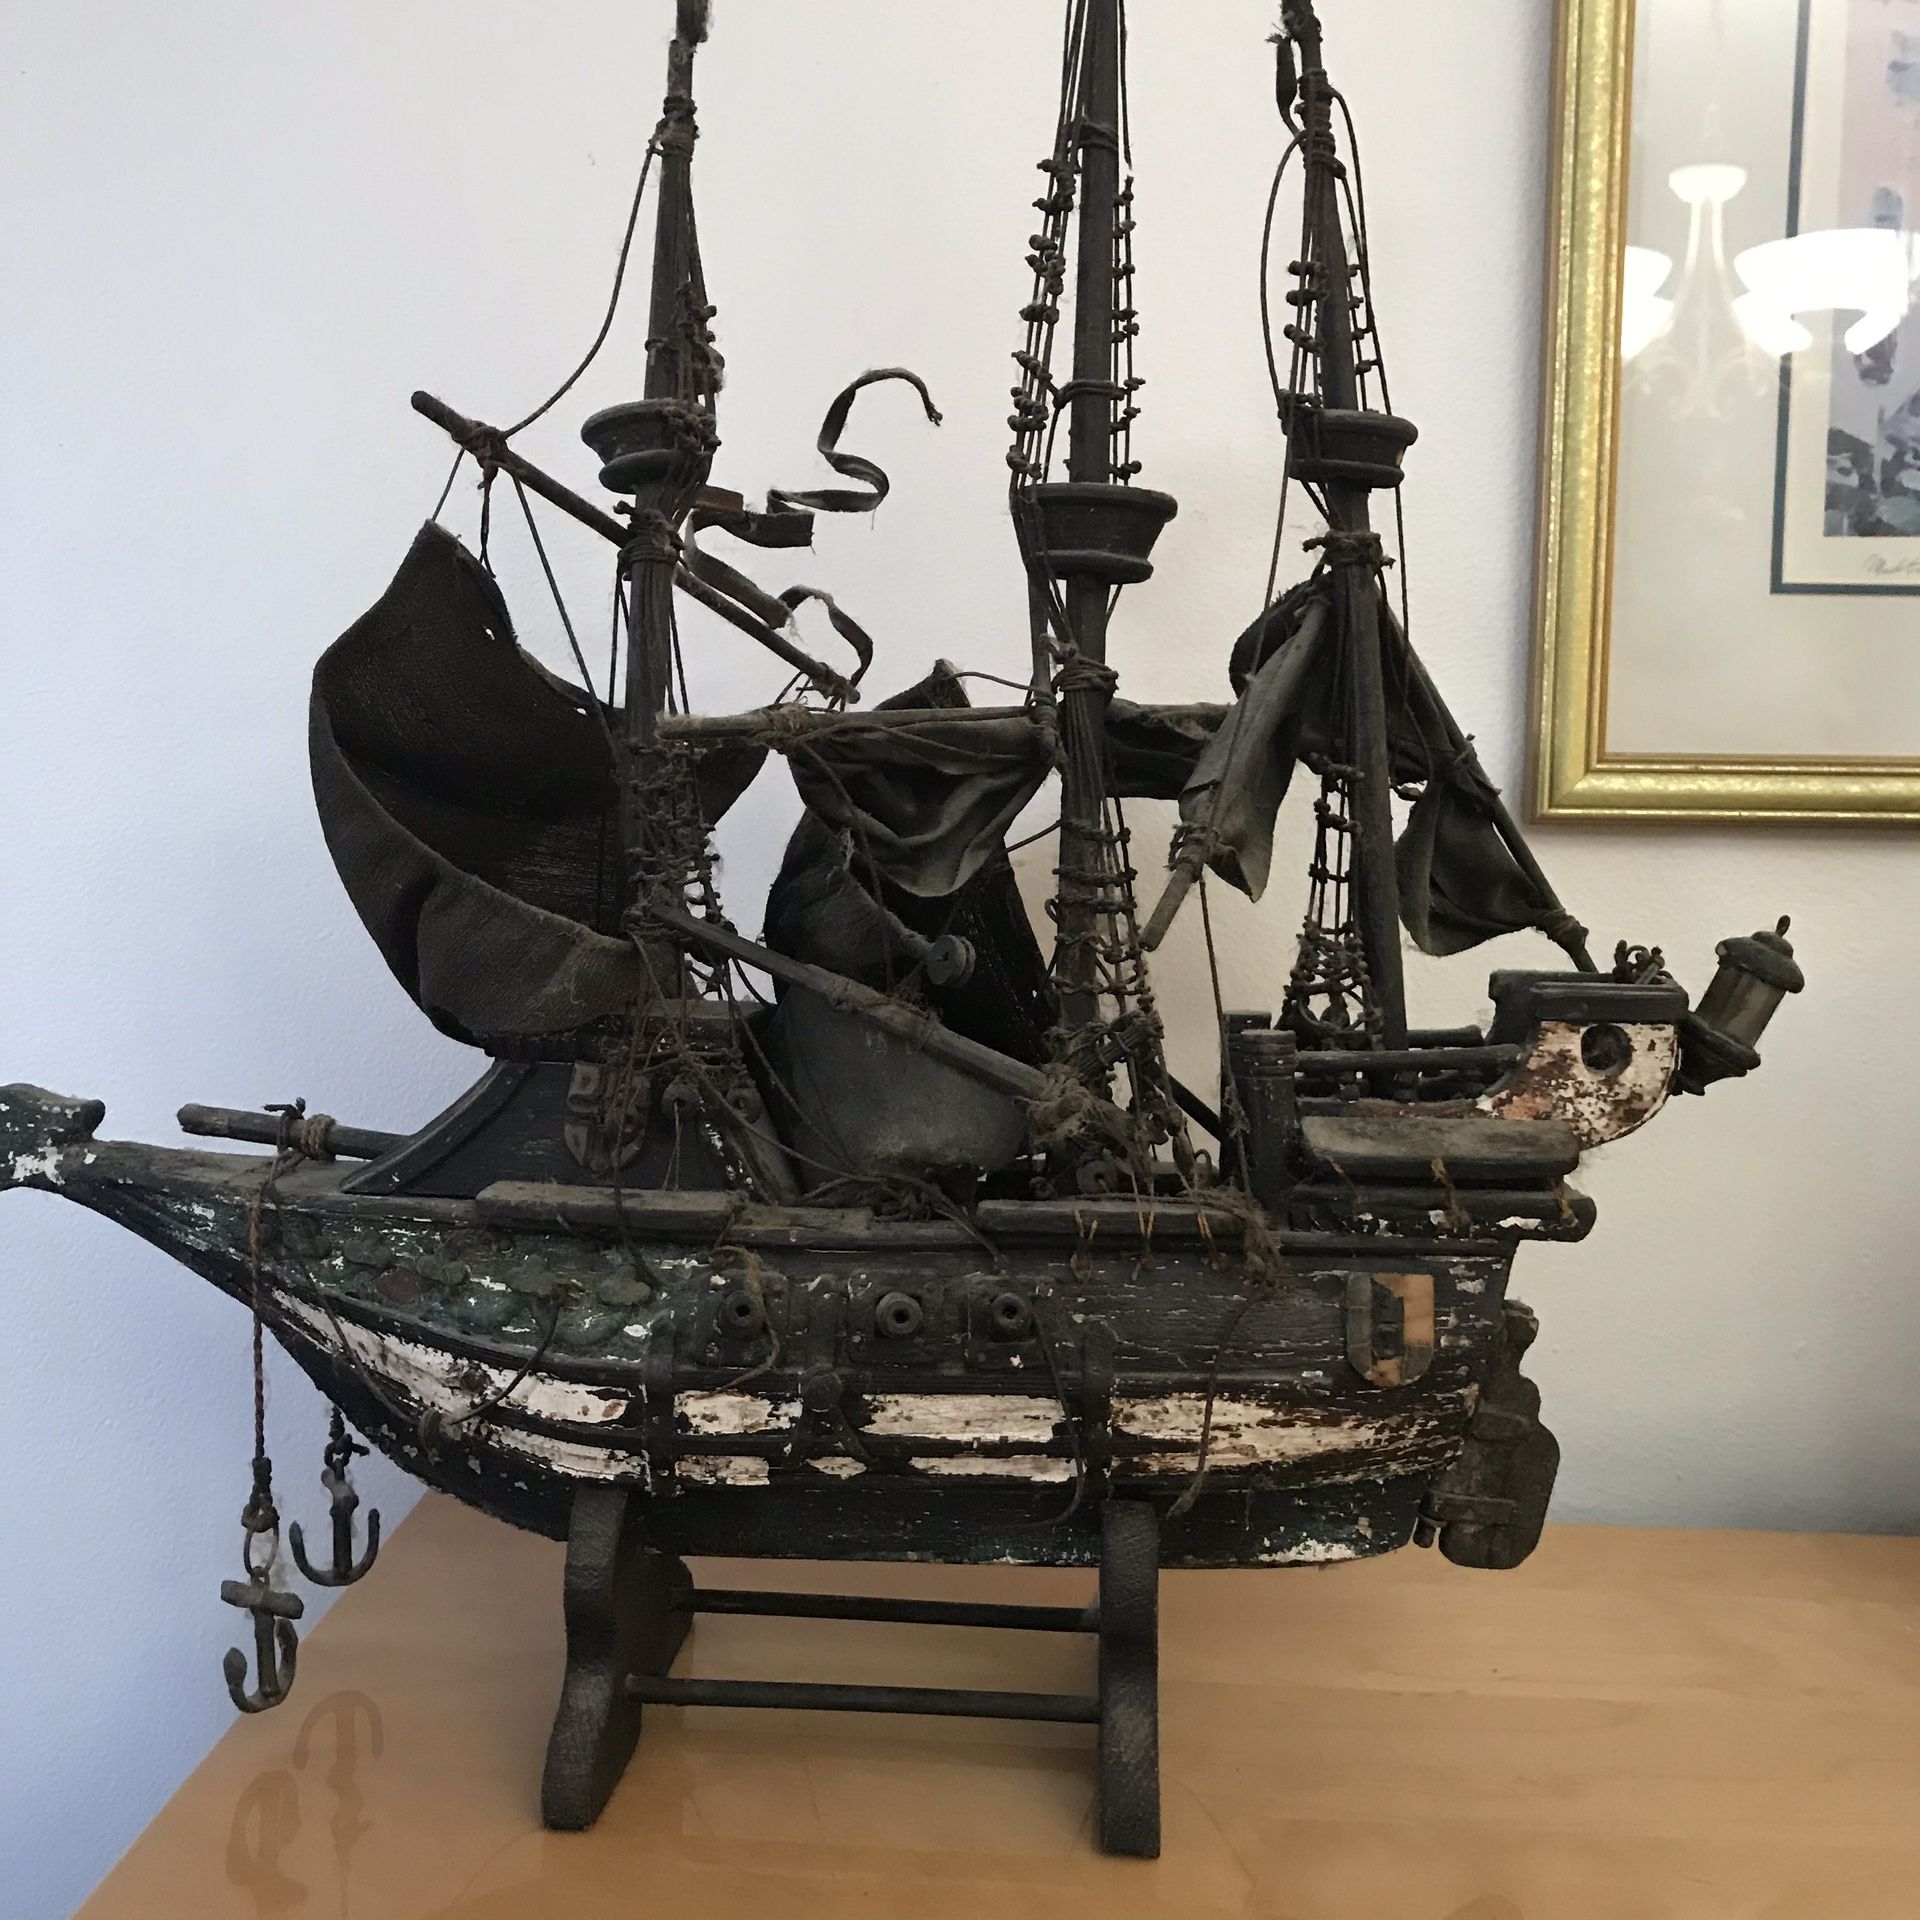 1920s Antique Handmade Ghost Pirate Ship/ Silver Mermaid. I got it from a man’s grandfather that got it from some immigrants that came here on a same